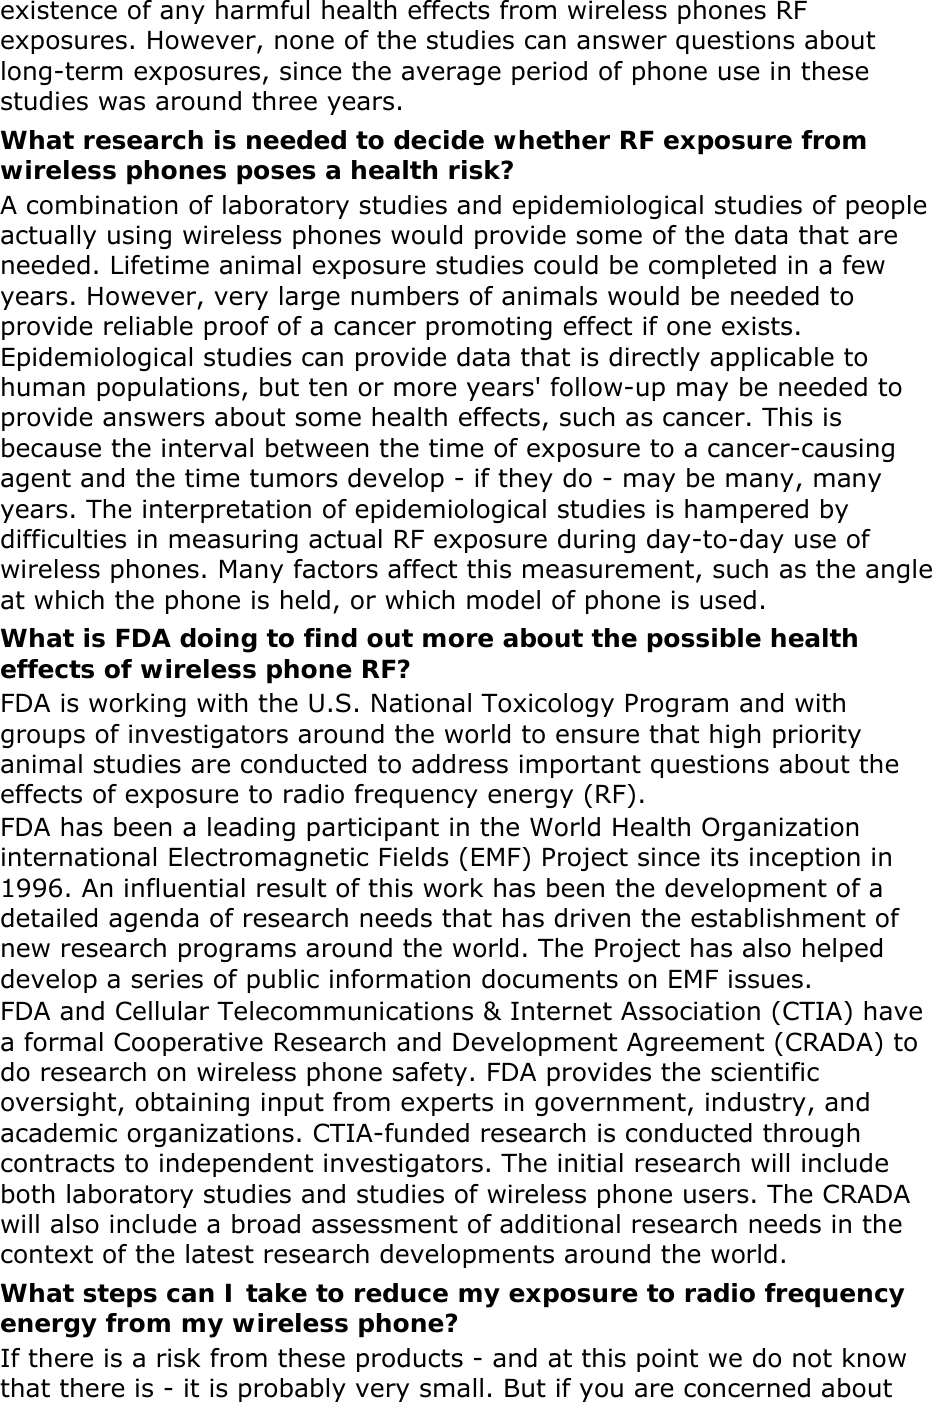 existence of any harmful health effects from wireless phones RF exposures. However, none of the studies can answer questions about long-term exposures, since the average period of phone use in these studies was around three years. What research is needed to decide whether RF exposure from wireless phones poses a health risk? A combination of laboratory studies and epidemiological studies of people actually using wireless phones would provide some of the data that are needed. Lifetime animal exposure studies could be completed in a few years. However, very large numbers of animals would be needed to provide reliable proof of a cancer promoting effect if one exists. Epidemiological studies can provide data that is directly applicable to human populations, but ten or more years&apos; follow-up may be needed to provide answers about some health effects, such as cancer. This is because the interval between the time of exposure to a cancer-causing agent and the time tumors develop - if they do - may be many, many years. The interpretation of epidemiological studies is hampered by difficulties in measuring actual RF exposure during day-to-day use of wireless phones. Many factors affect this measurement, such as the angle at which the phone is held, or which model of phone is used. What is FDA doing to find out more about the possible health effects of wireless phone RF? FDA is working with the U.S. National Toxicology Program and with groups of investigators around the world to ensure that high priority animal studies are conducted to address important questions about the effects of exposure to radio frequency energy (RF). FDA has been a leading participant in the World Health Organization international Electromagnetic Fields (EMF) Project since its inception in 1996. An influential result of this work has been the development of a detailed agenda of research needs that has driven the establishment of new research programs around the world. The Project has also helped develop a series of public information documents on EMF issues. FDA and Cellular Telecommunications &amp; Internet Association (CTIA) have a formal Cooperative Research and Development Agreement (CRADA) to do research on wireless phone safety. FDA provides the scientific oversight, obtaining input from experts in government, industry, and academic organizations. CTIA-funded research is conducted through contracts to independent investigators. The initial research will include both laboratory studies and studies of wireless phone users. The CRADA will also include a broad assessment of additional research needs in the context of the latest research developments around the world. What steps can I take to reduce my exposure to radio frequency energy from my wireless phone? If there is a risk from these products - and at this point we do not know that there is - it is probably very small. But if you are concerned about 